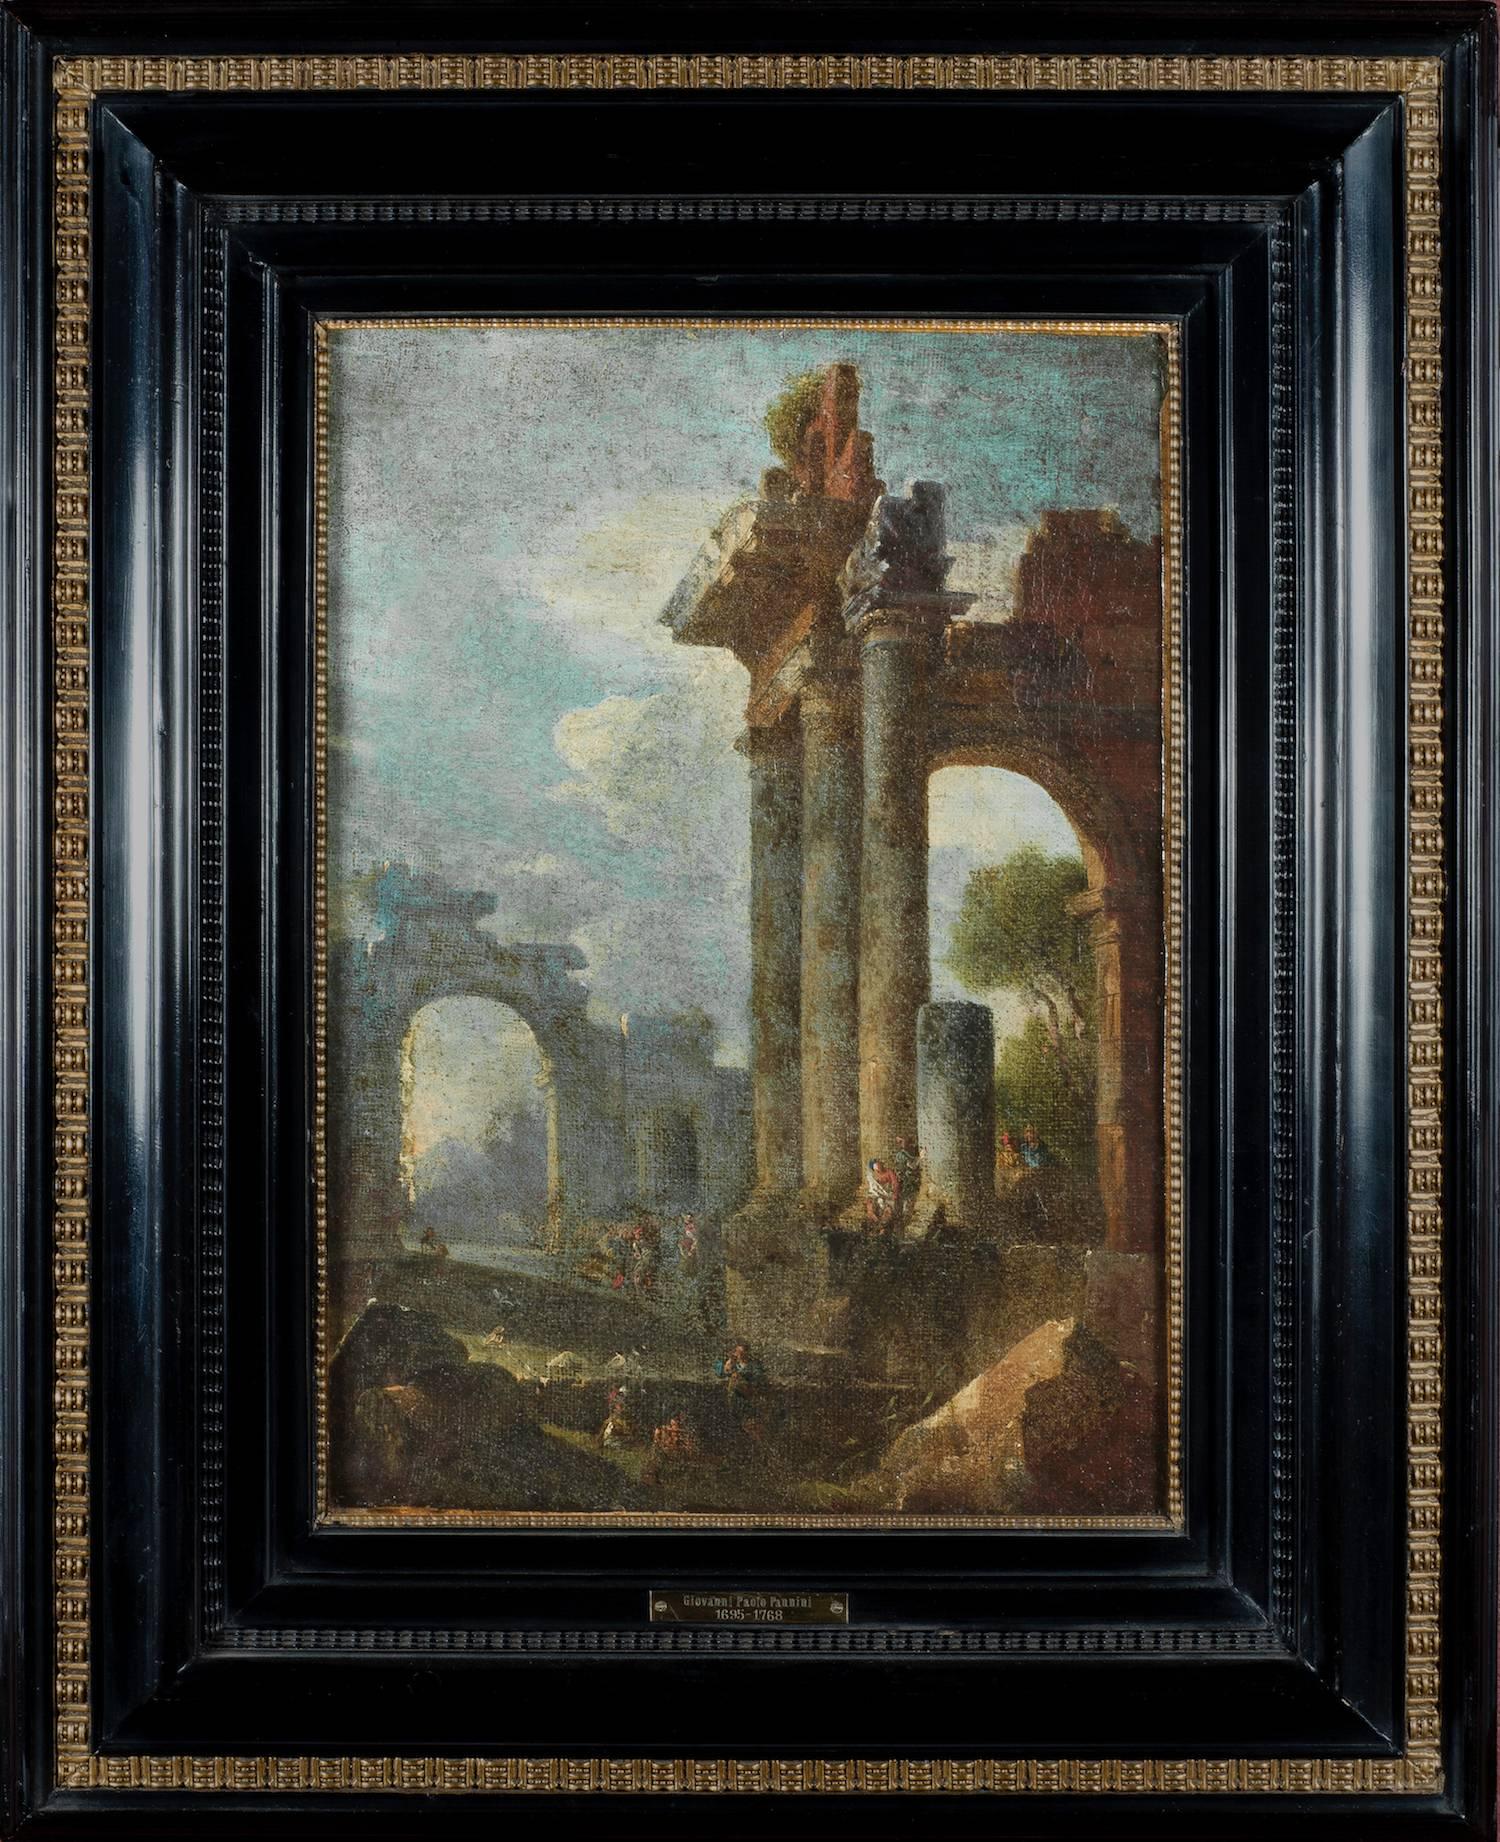 Accomplished 18th century Italian grand tour Architectural ruins painting in an elegant ebonized and gilded wood frame

The phenomenon of Italian ruin painting began in the mid-17th century, and is a Baroque development. It reached its Zenith in